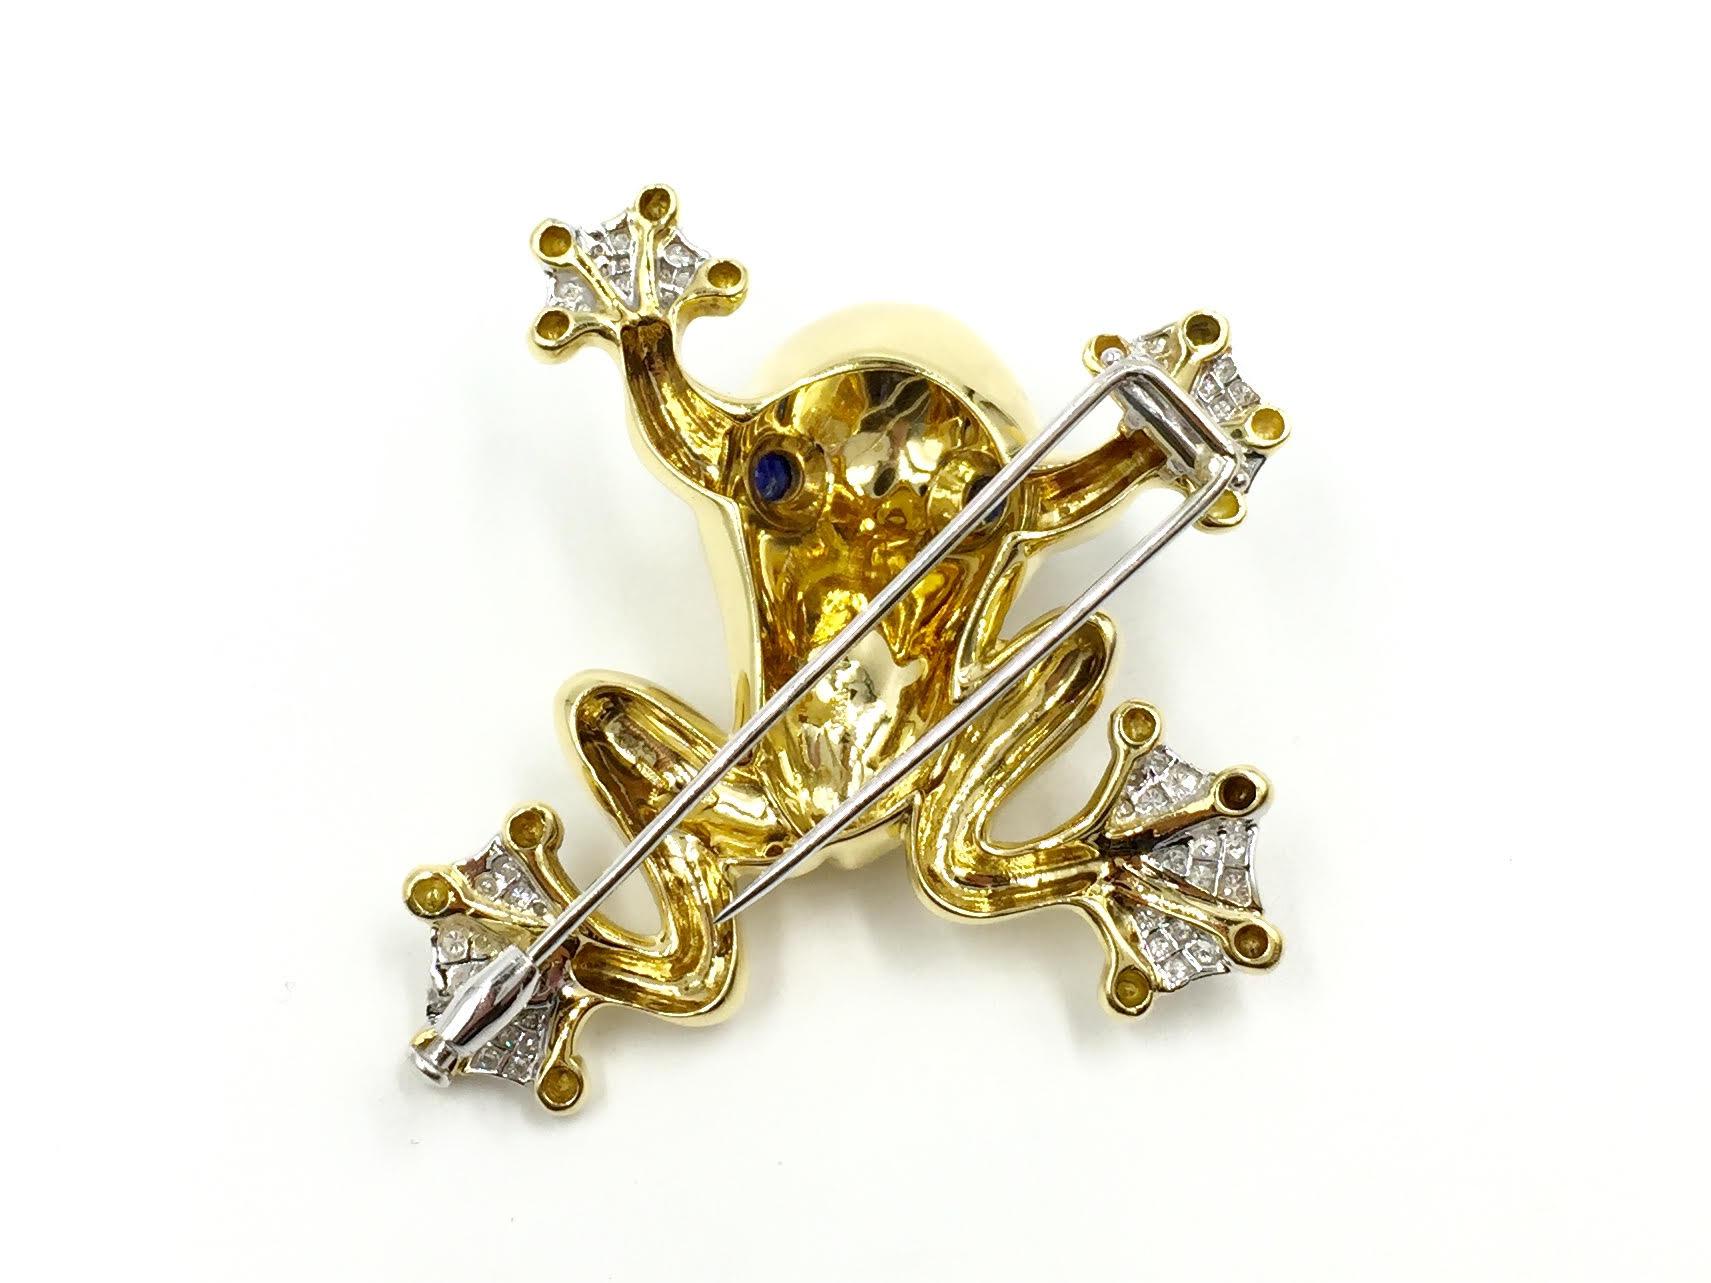 18 Karat Gold Frog Brooch with Diamonds and Blue Sapphires 1